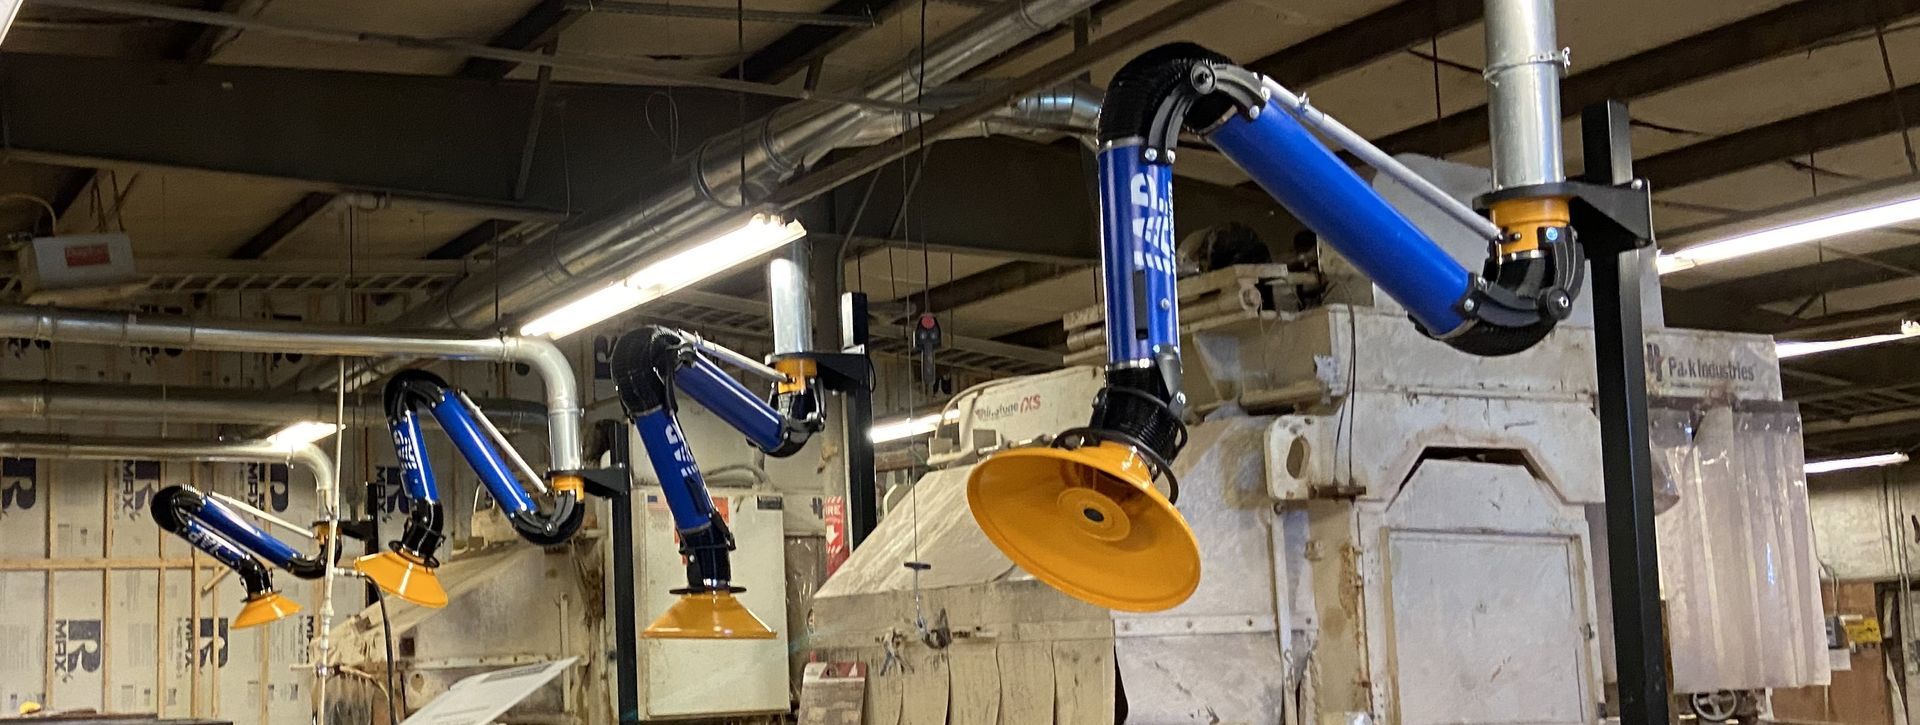 Innovations in welding fume extraction arm design by IAP